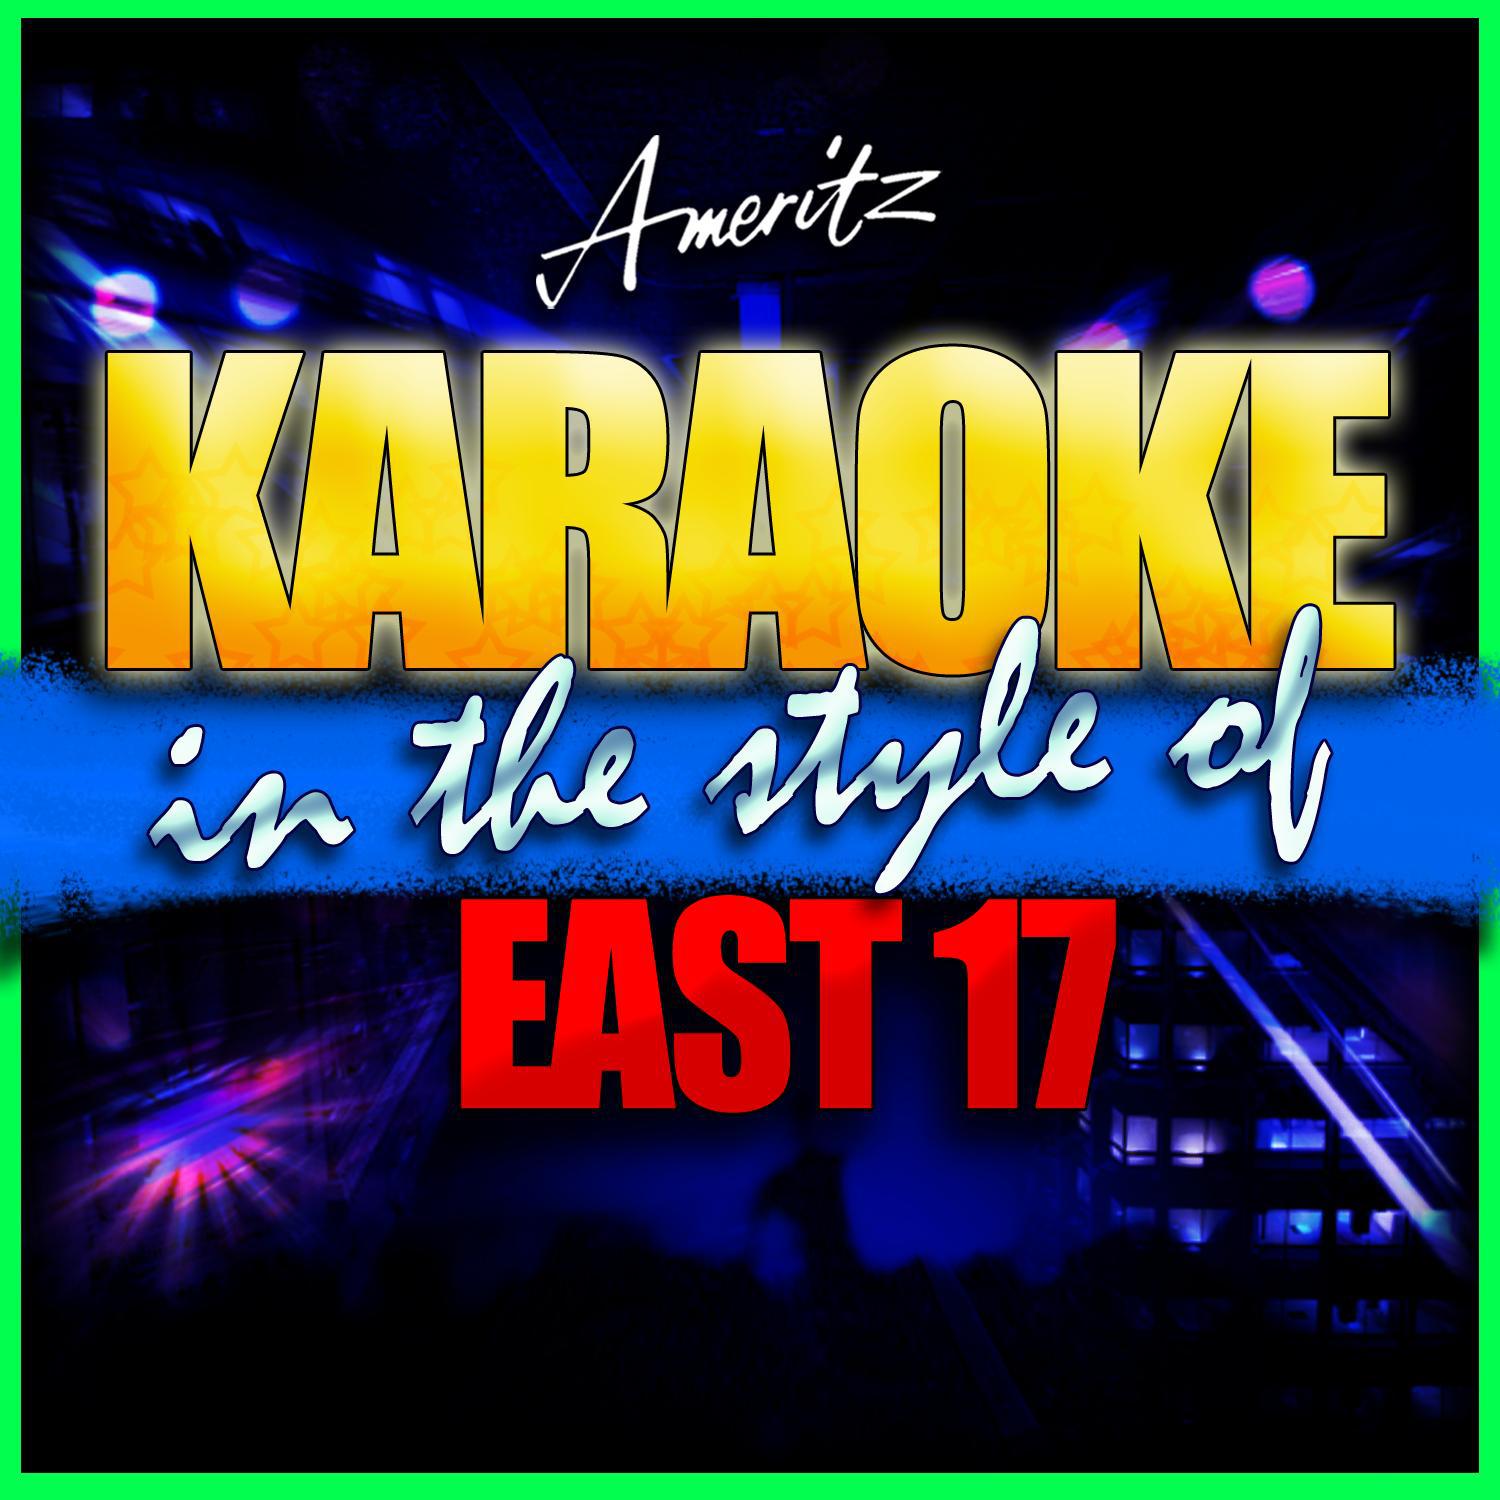 If You Ever (In the Style of East 17) [Instrumental Version]